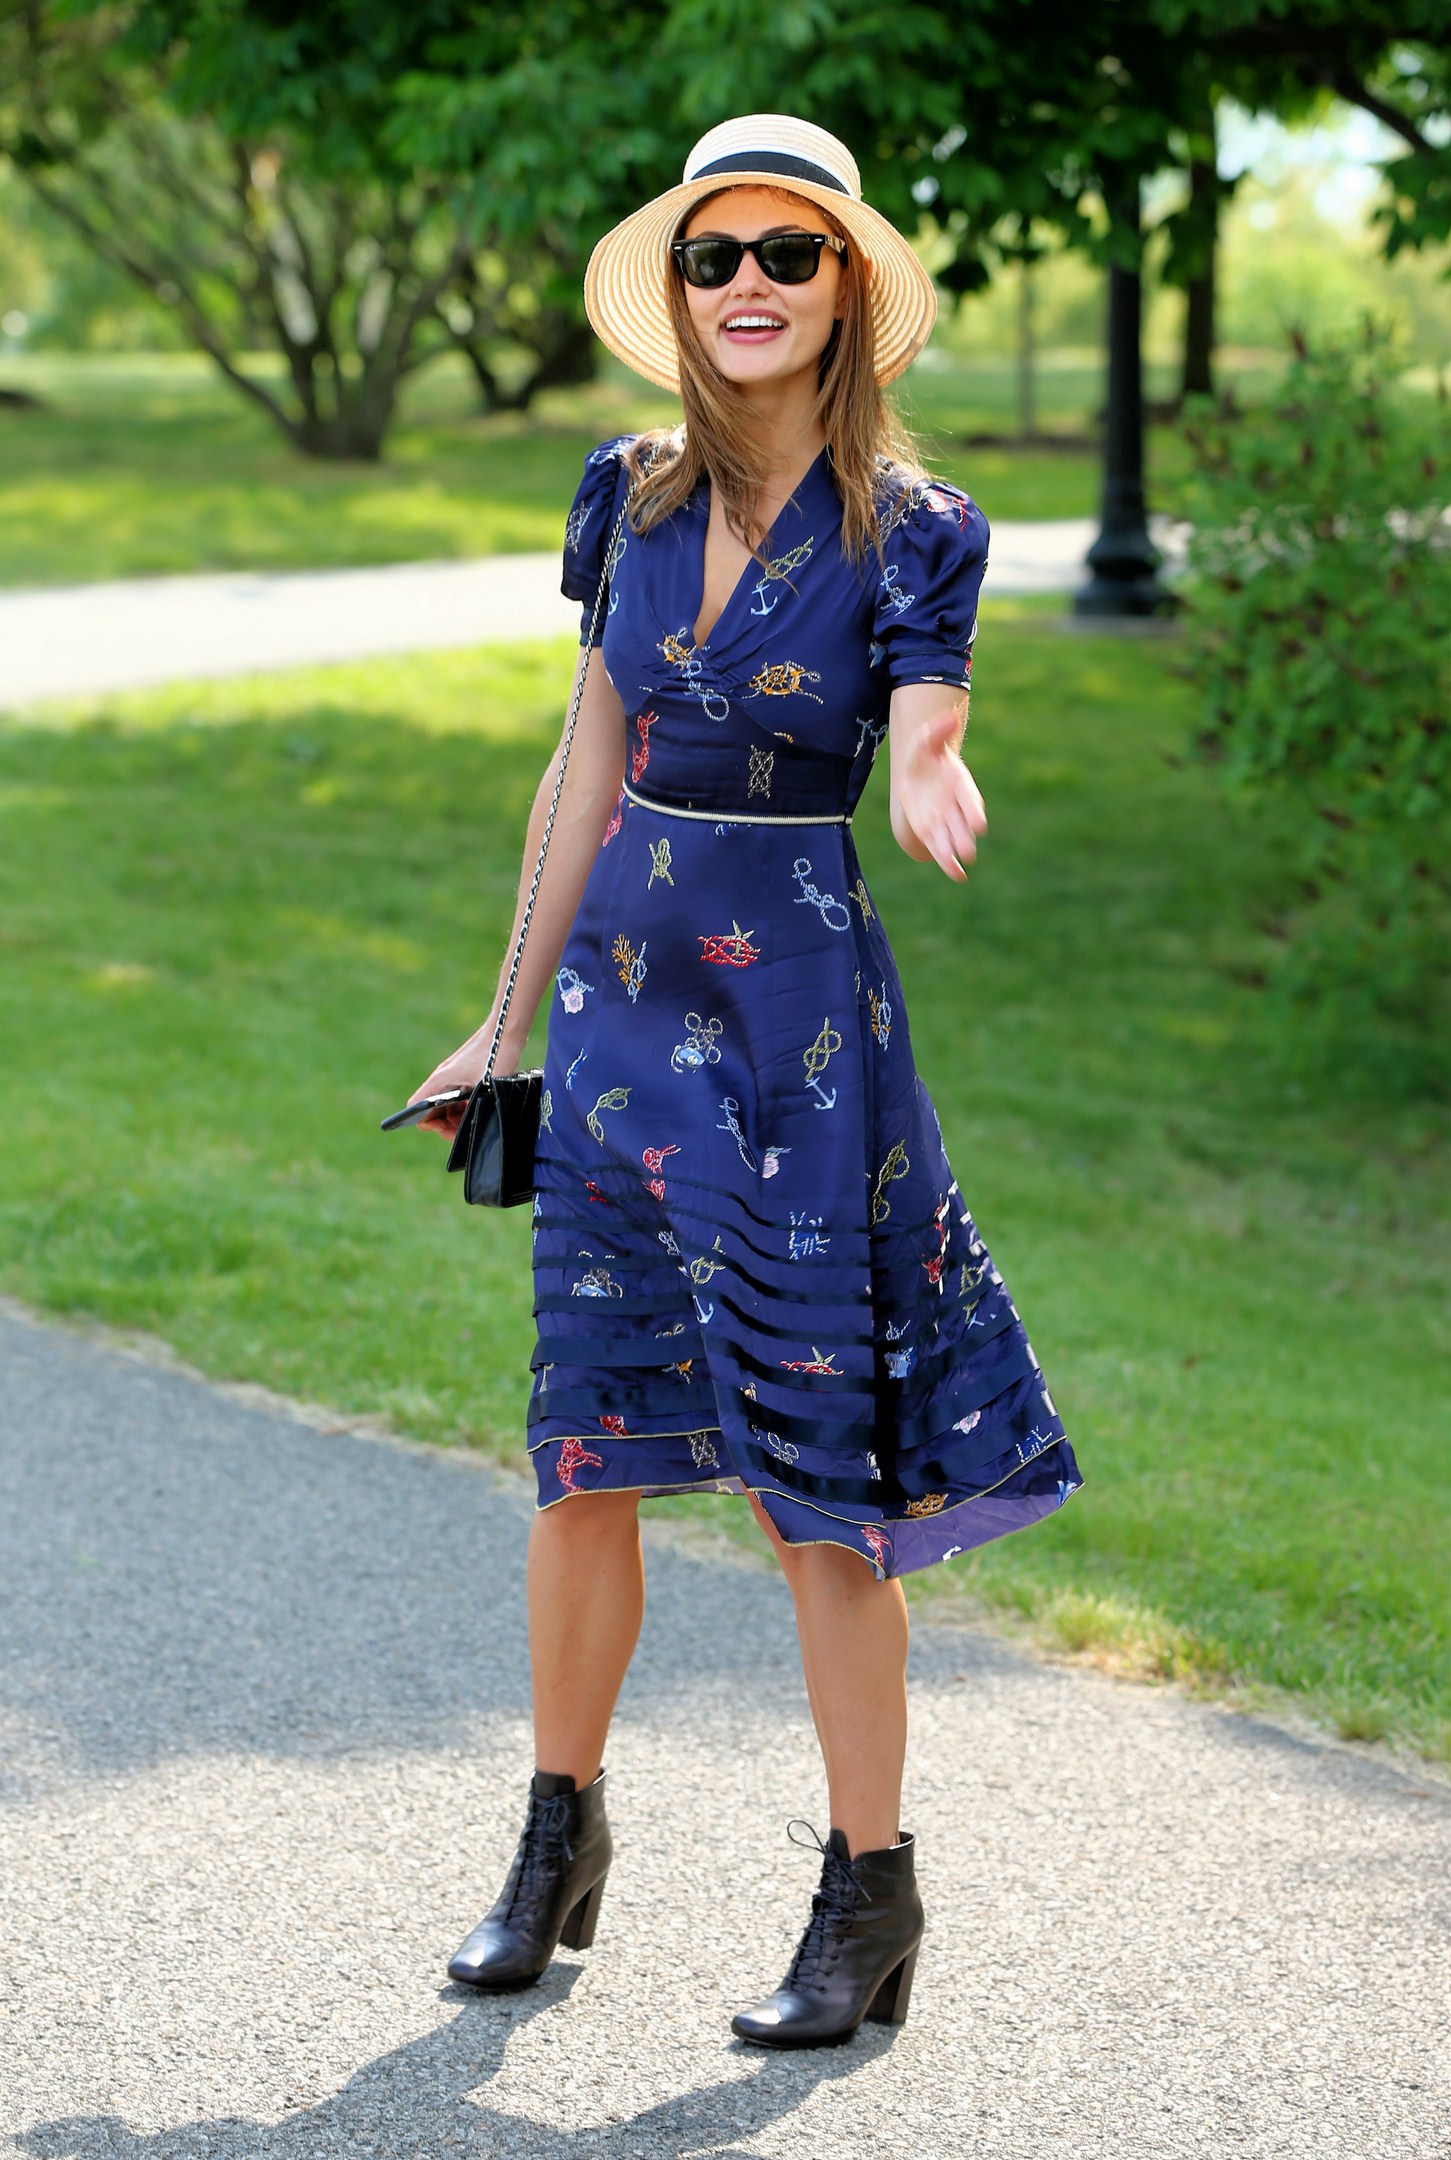 phoebe-tonkin-the-ninth-annual-veuve-clicquot-polo-classic-in-new-jersey-6416-13 (Копировать).jpg